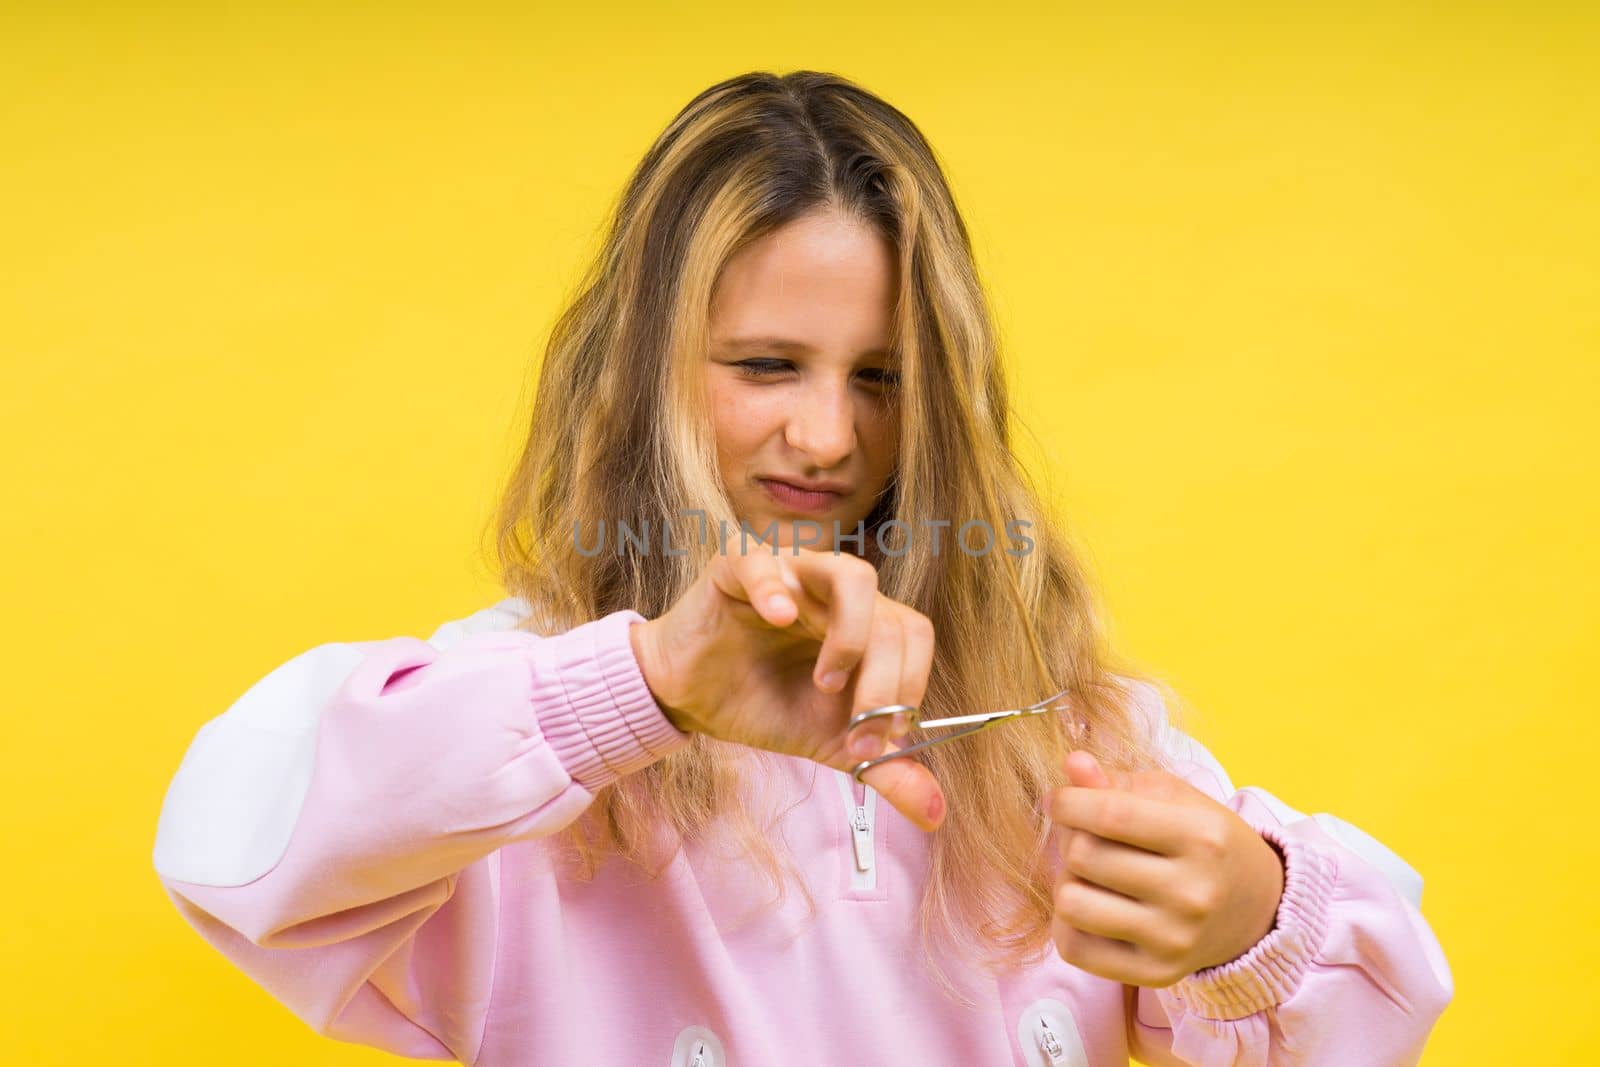 Child adorable girl hairdresser cutting long blonde hair with metallic scissors on a yellow